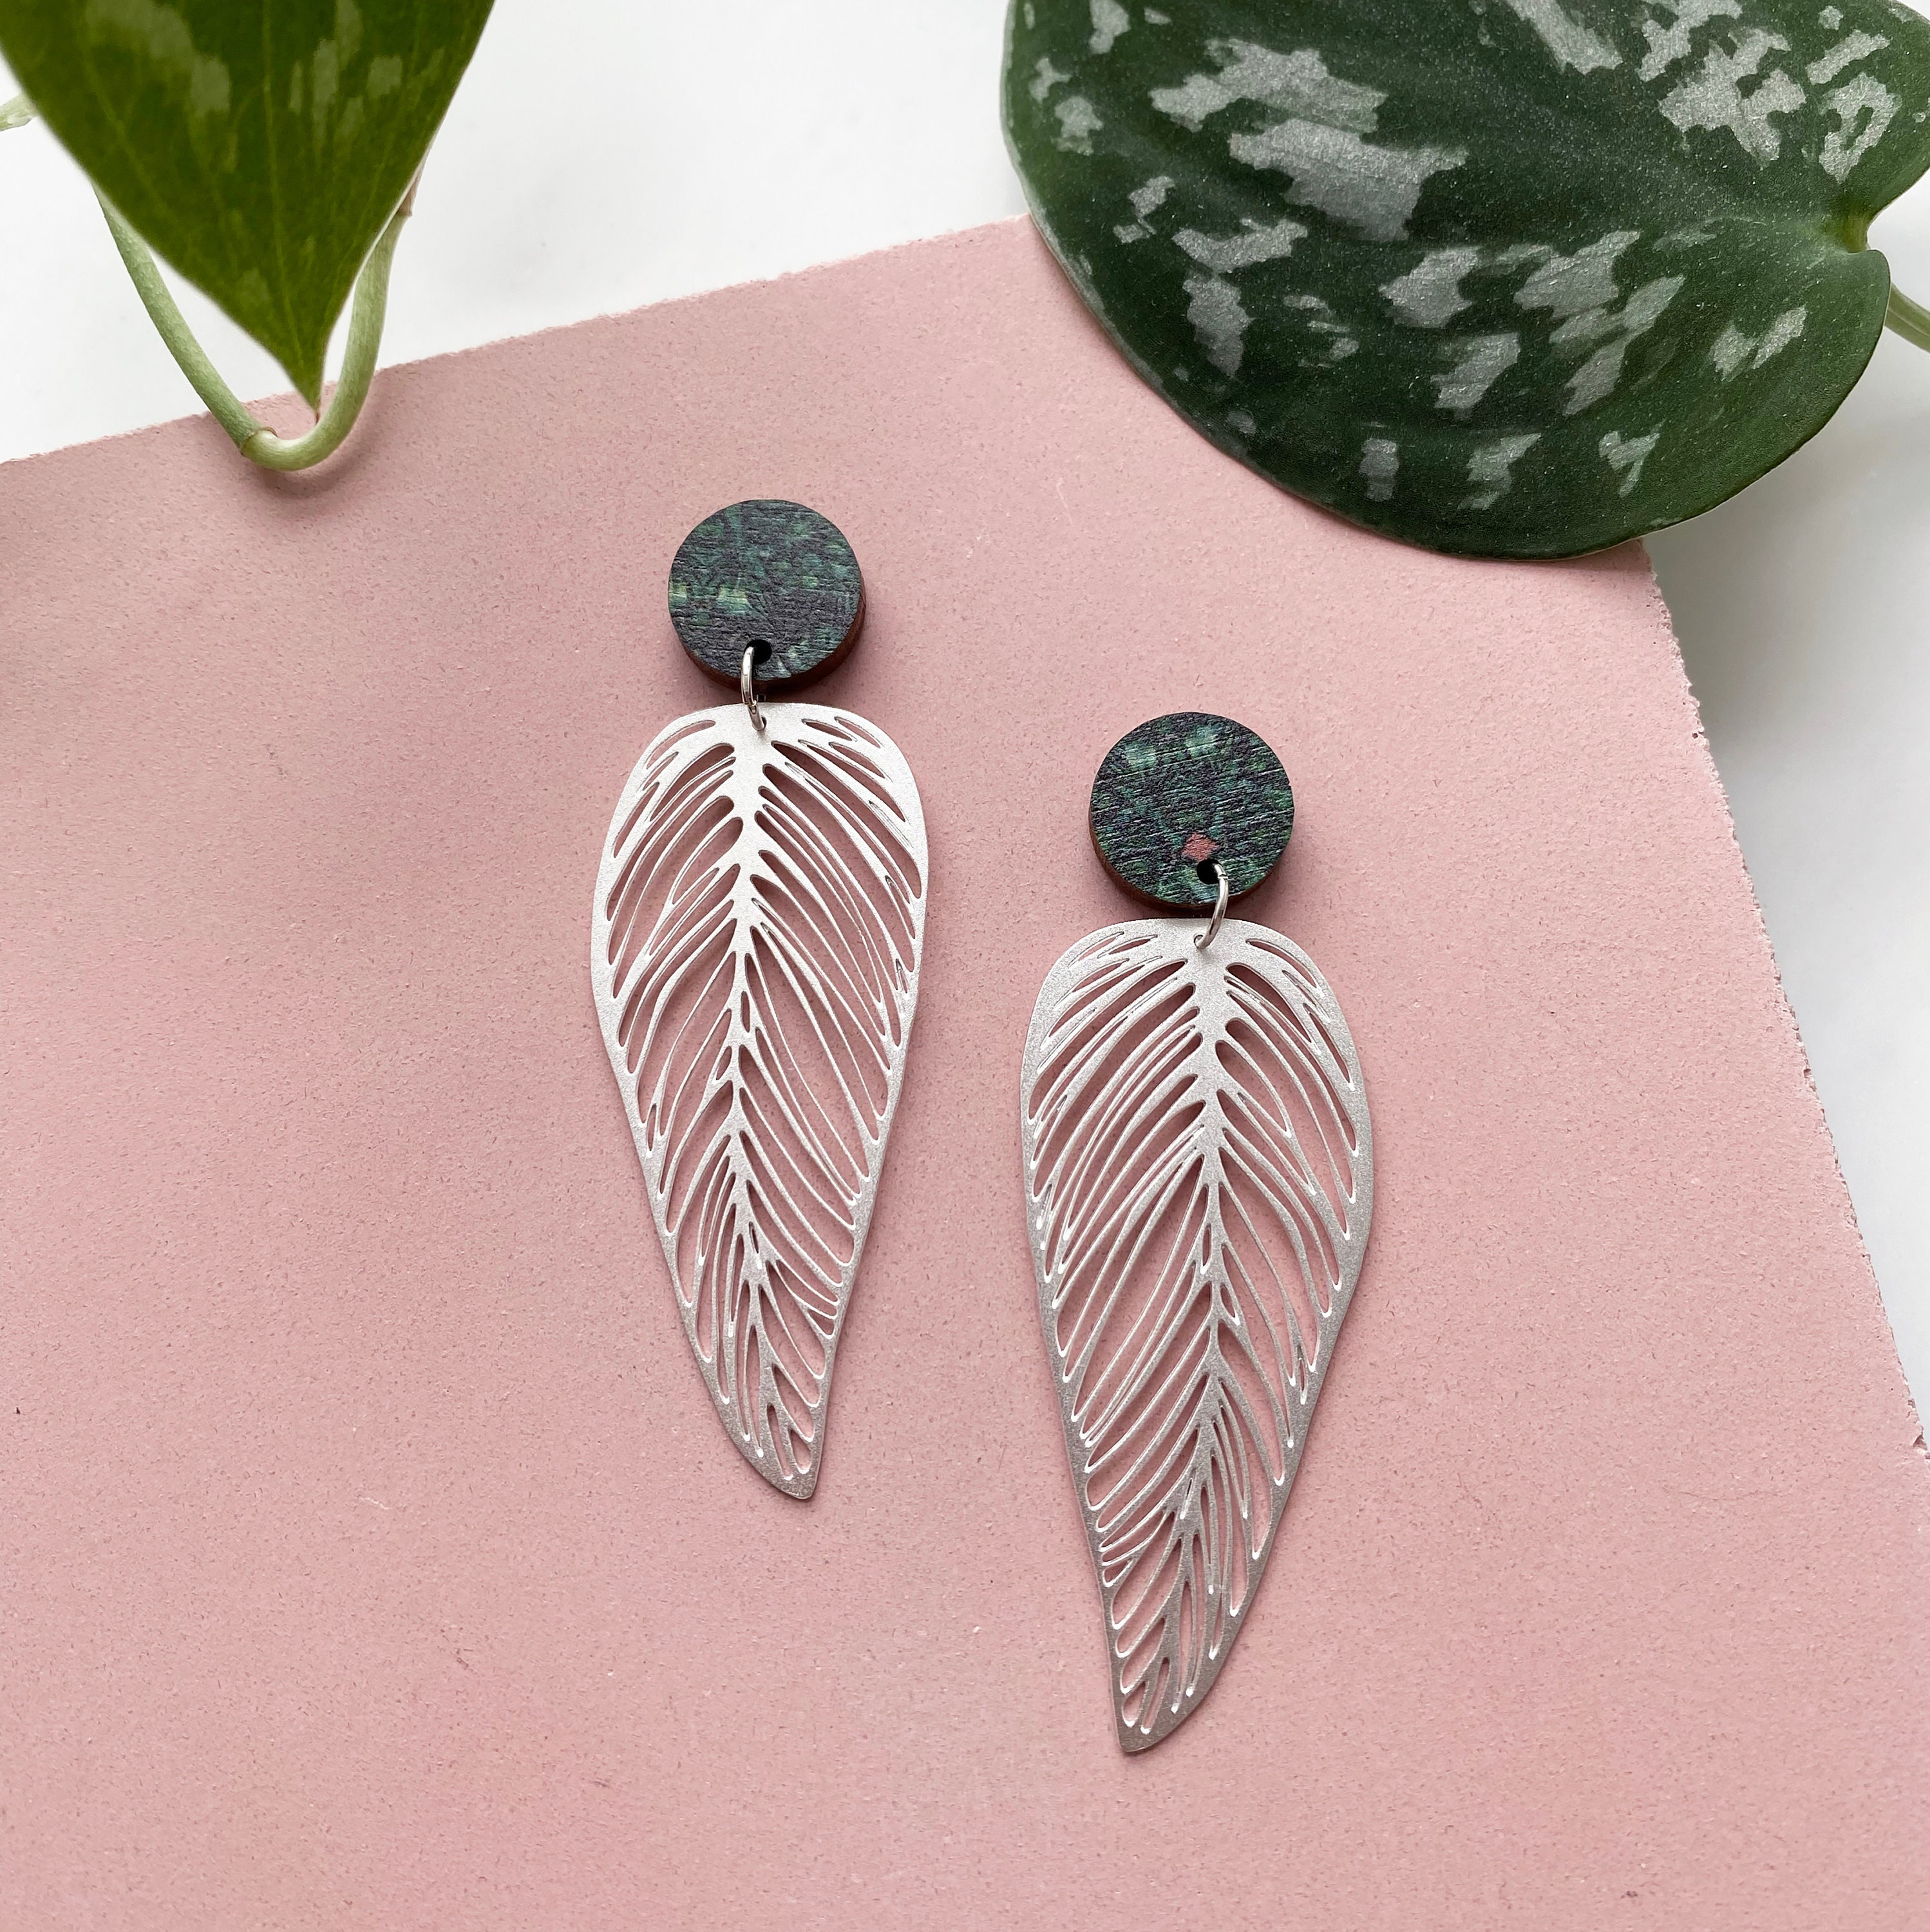 Statement Silver Leaf Drop Earrings - Plant Stud Botanical Studs Gift For Her Jewellery